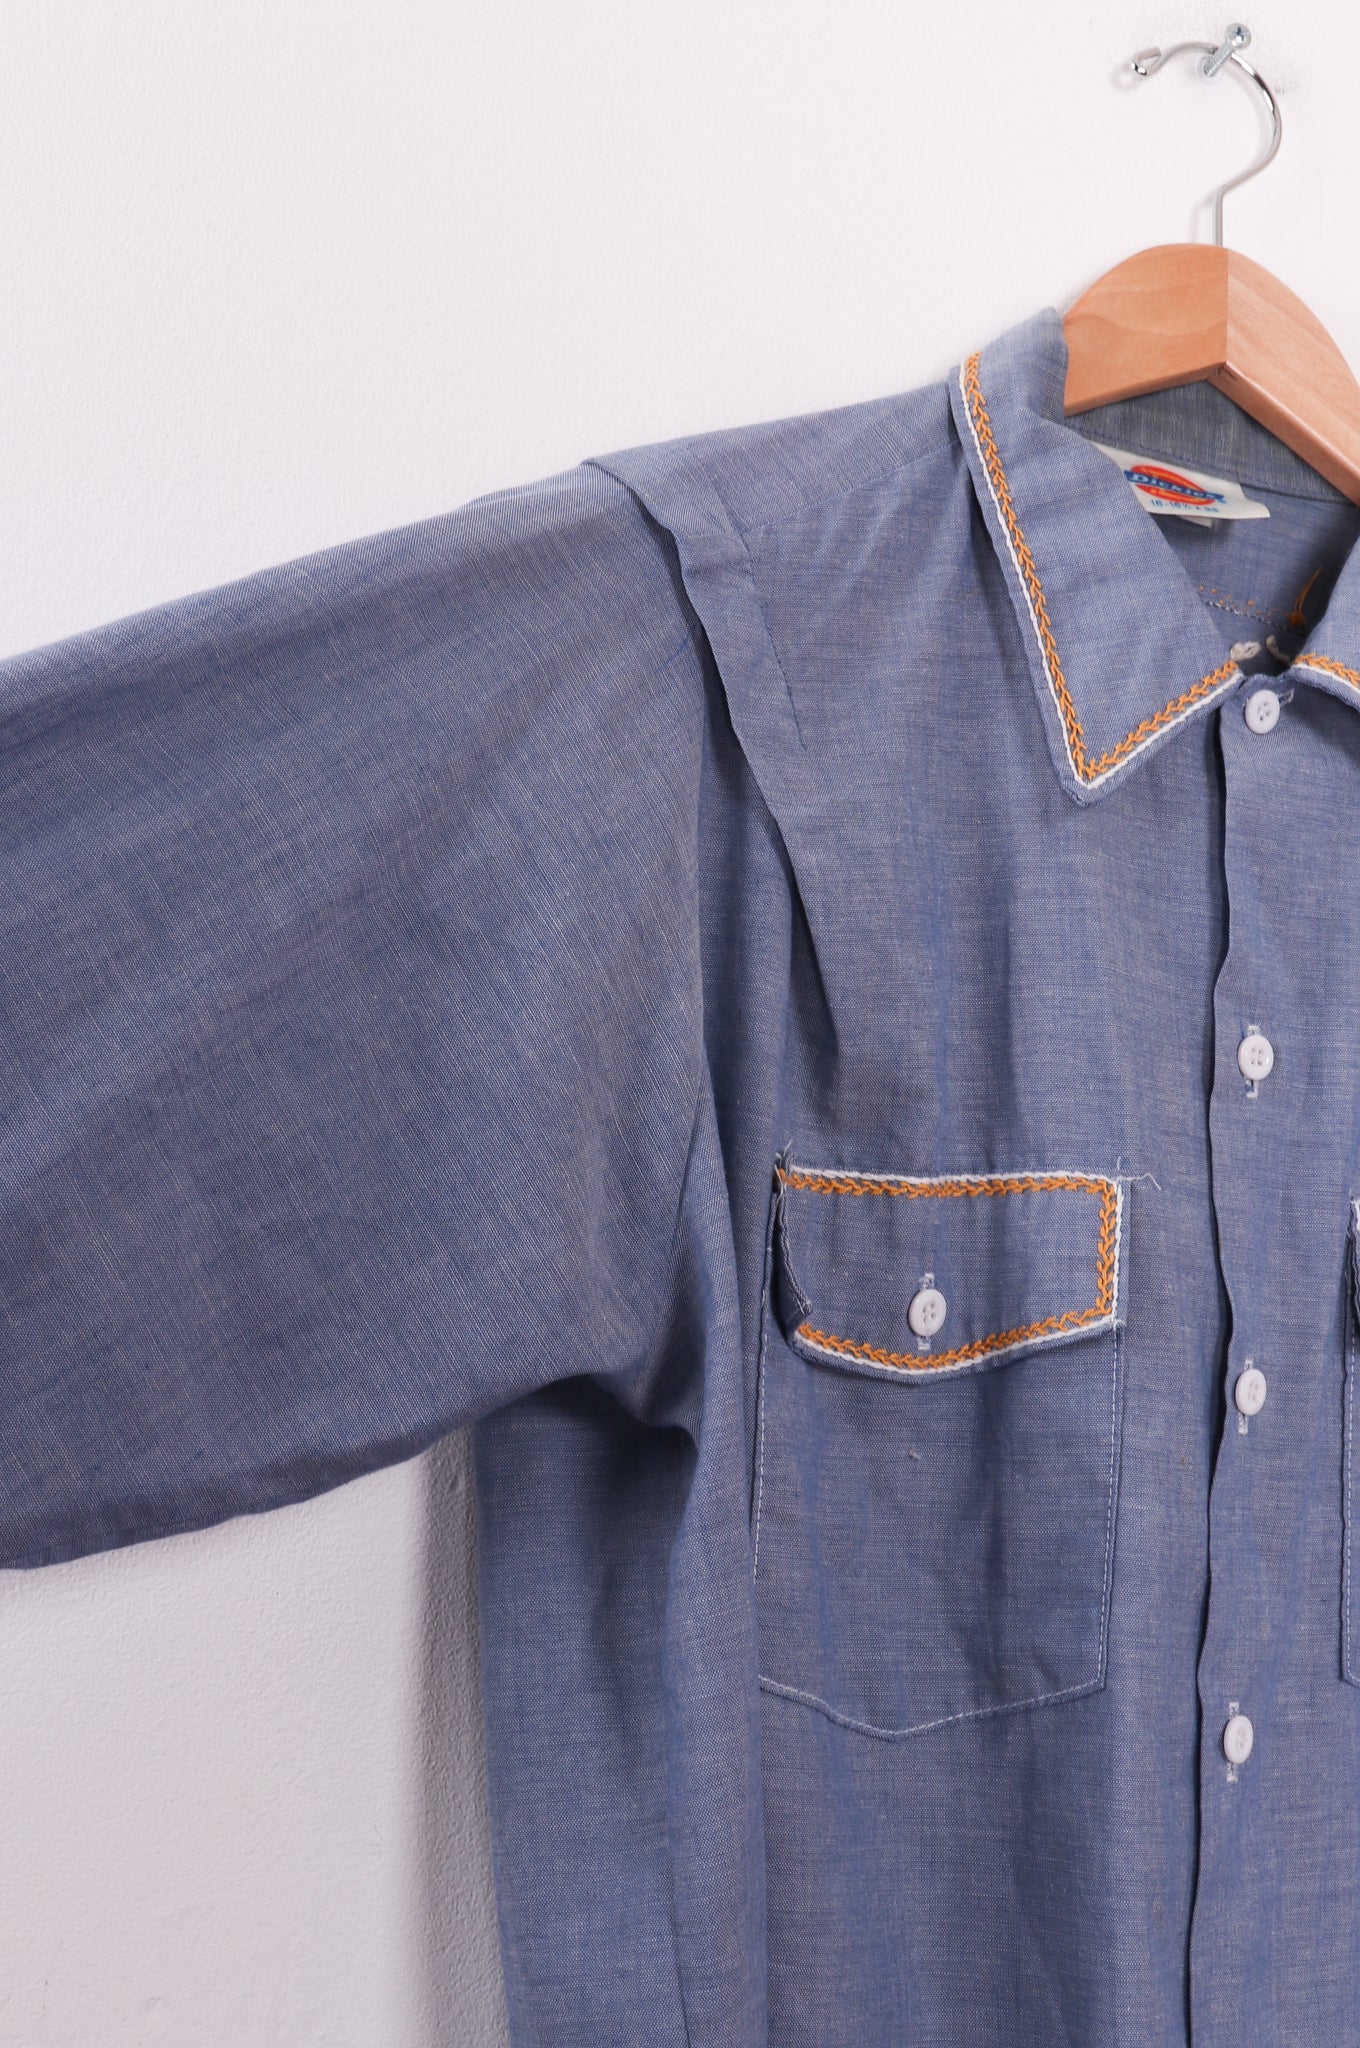 Dickies Embroidered Chambray Button Up